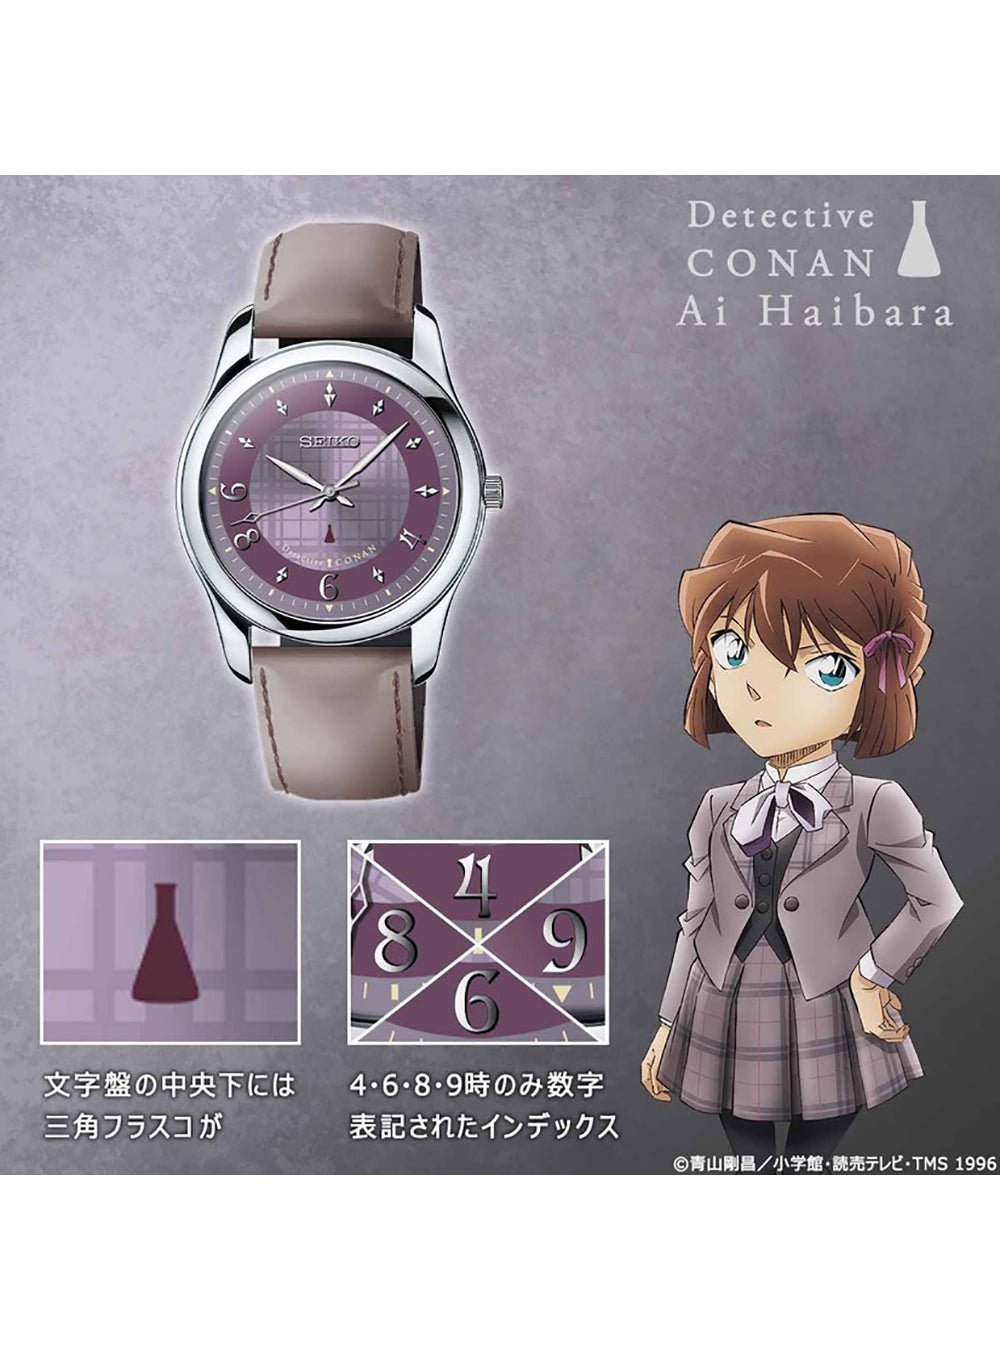 DETECTIVE CONAN × SEIKO COLLABORATION WATCH MADE IN JAPAN LIMITED EDITIONWRISTWATCHjapan-select